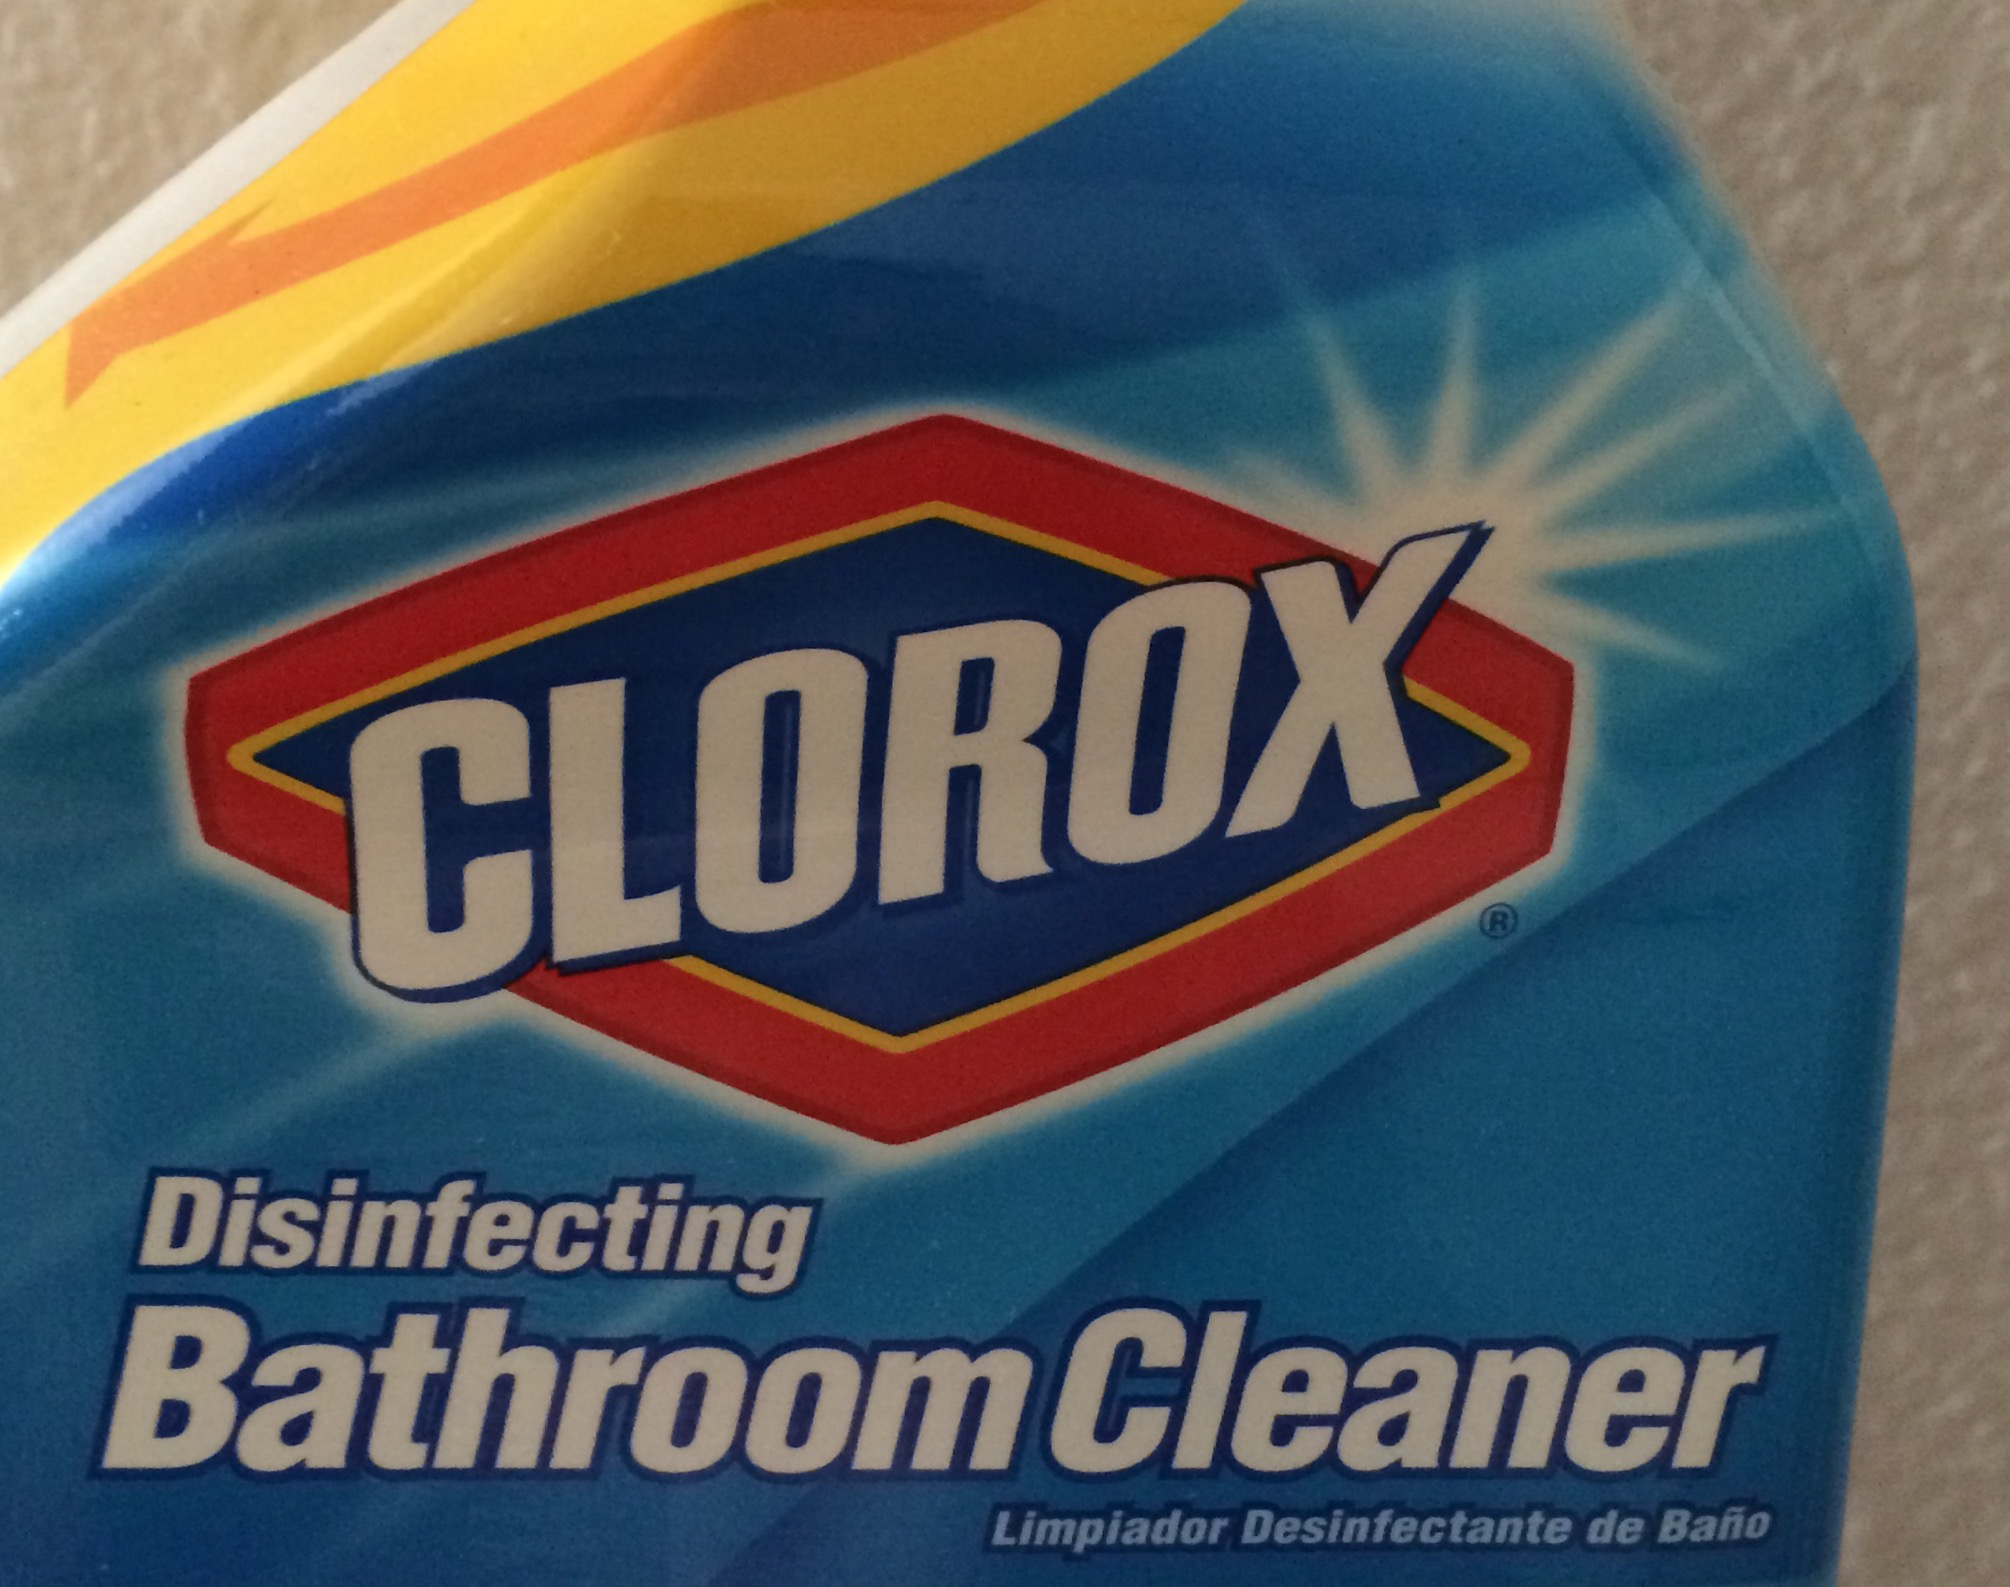 I Can Use Bleach for Mold Remediation, Right? Wrong!